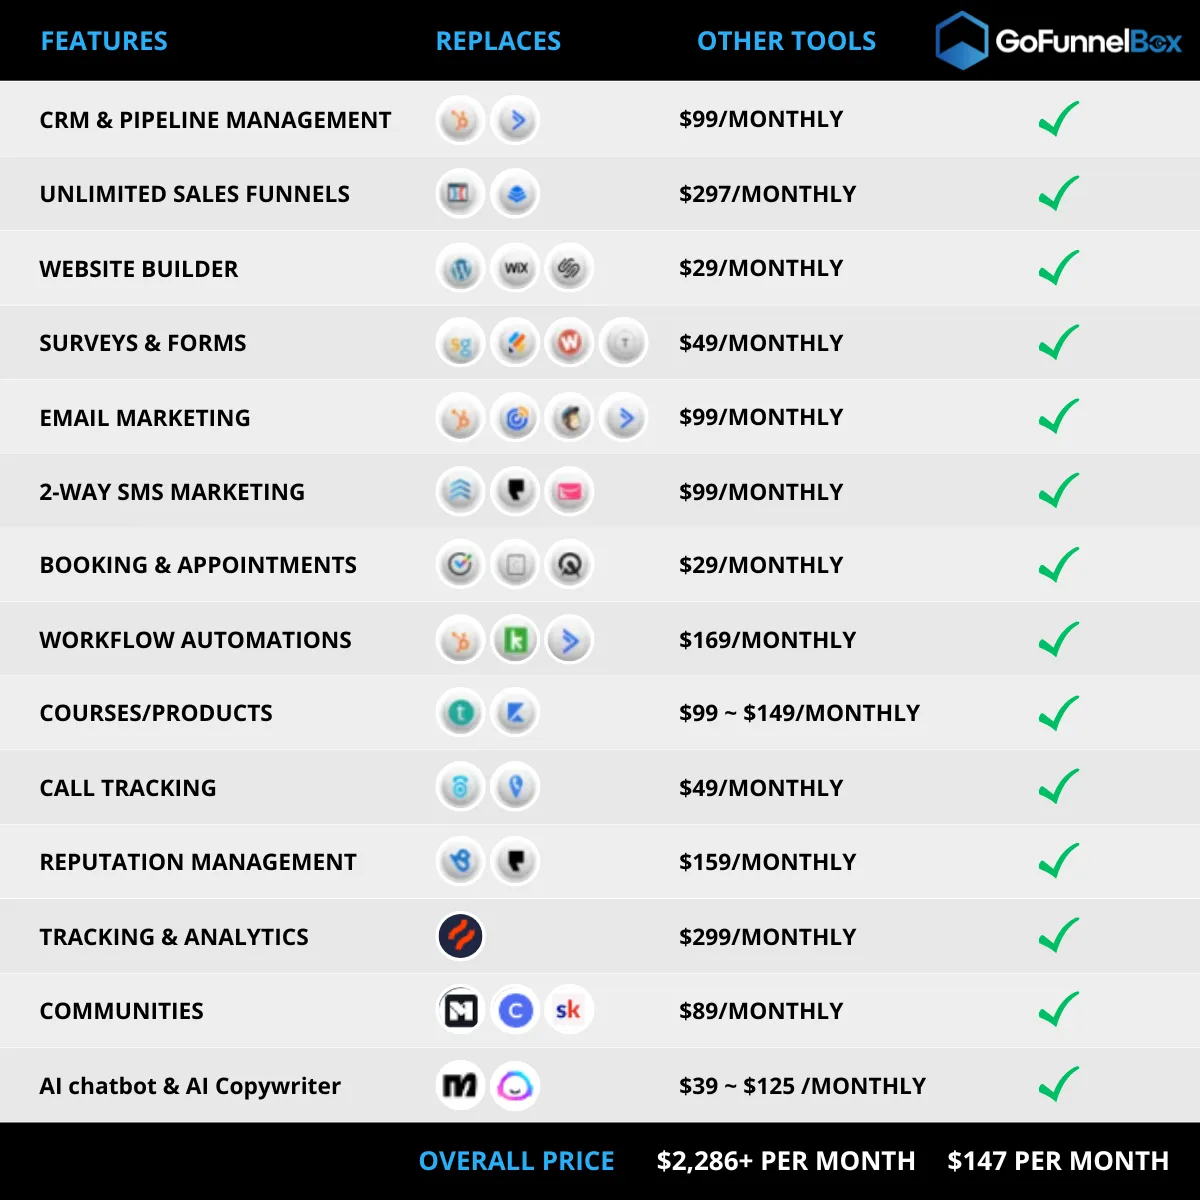 Image of all the lists of software companies with the comparison on howGofunnelbox is so awesome.